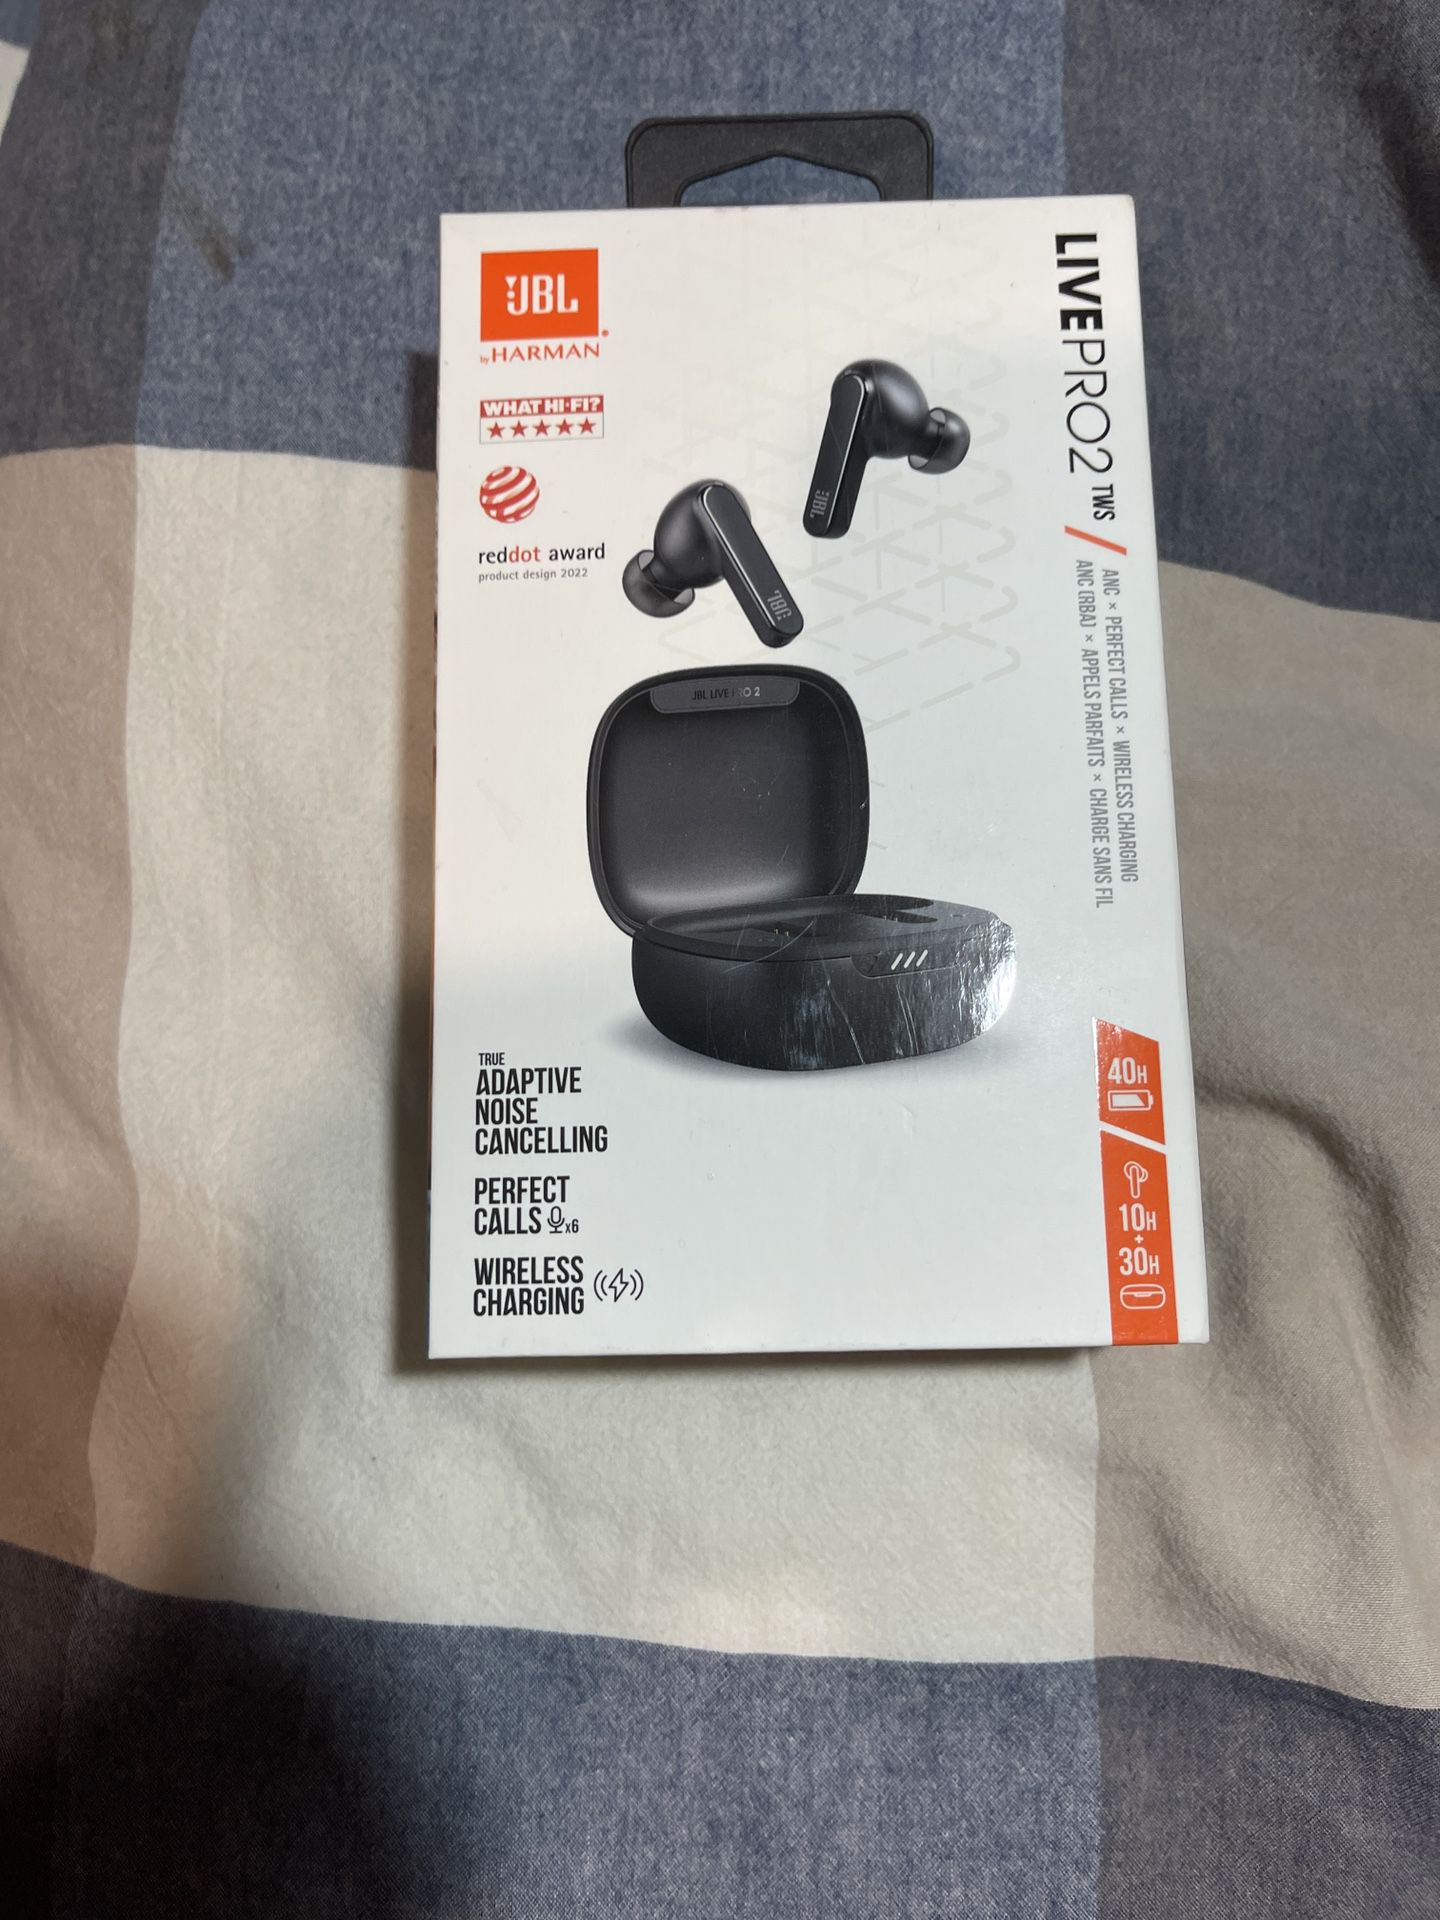 JBL Pro Tour 2 Wireless Bluetooth Headphones Ear Buds MSRP $120 Comes with one set of ear tips